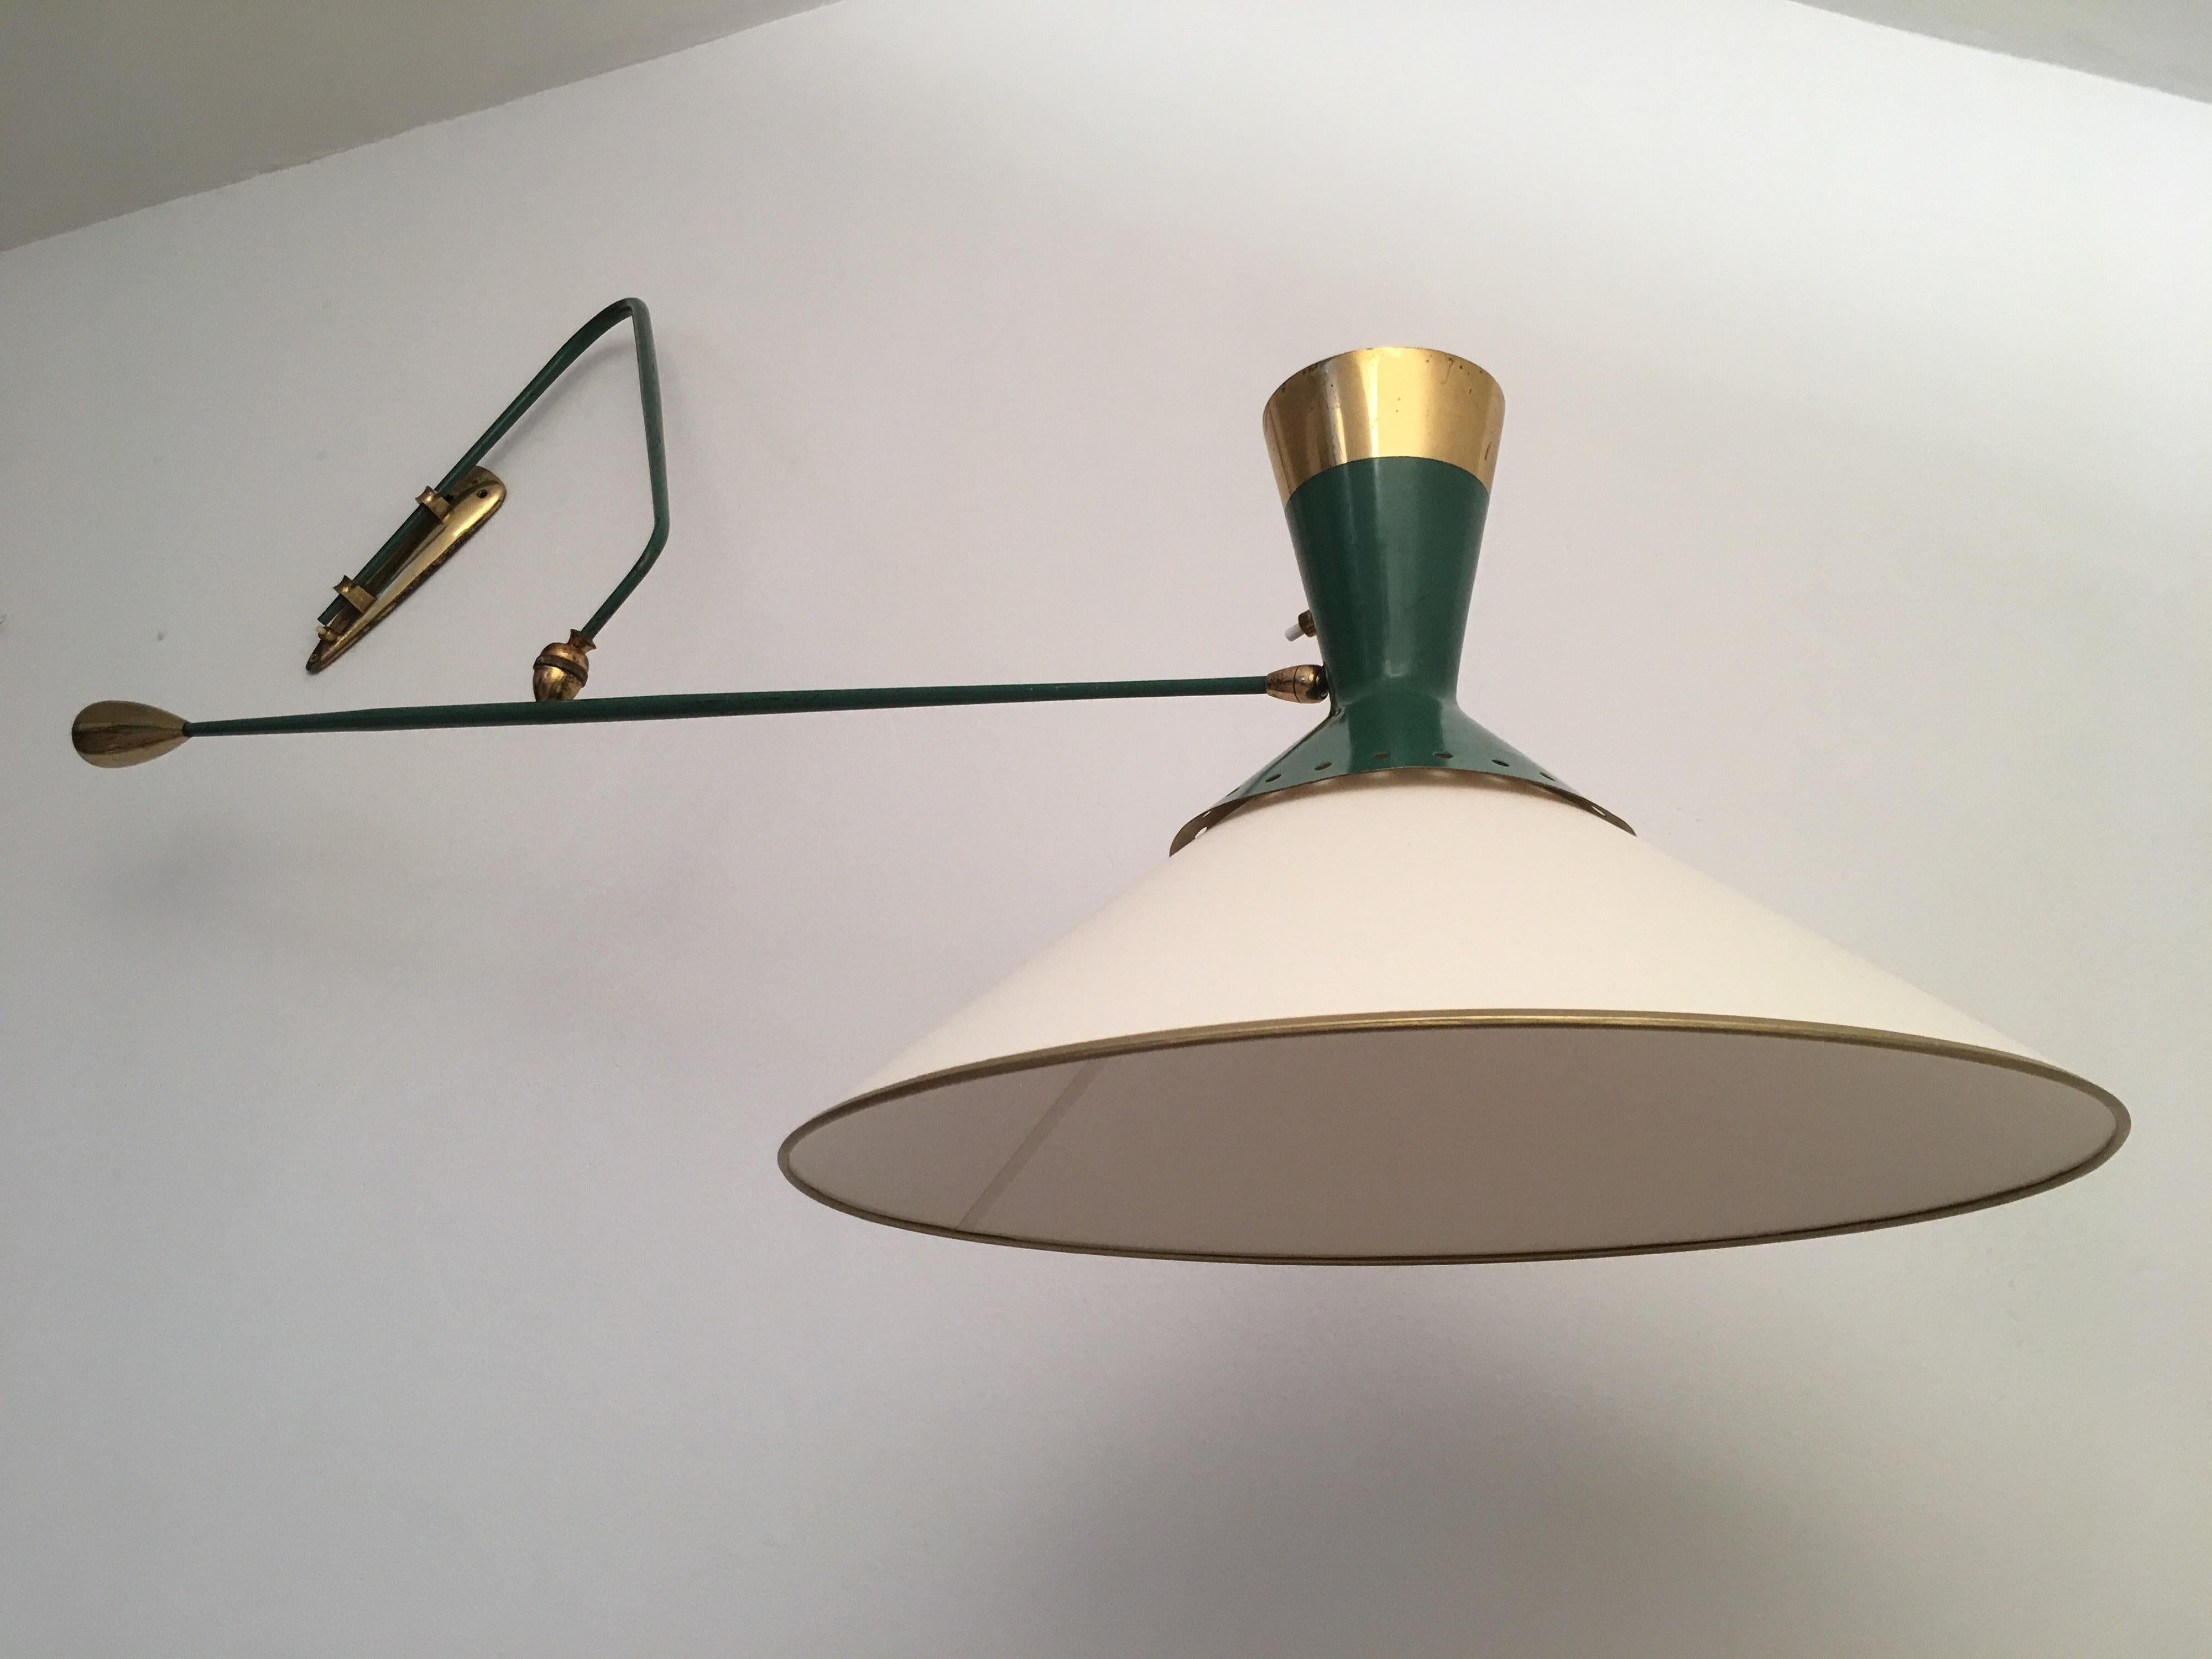 Arlus Green and Gilt Counter Balance Swing Arm Wall Lamp, French 1950s For Sale 2